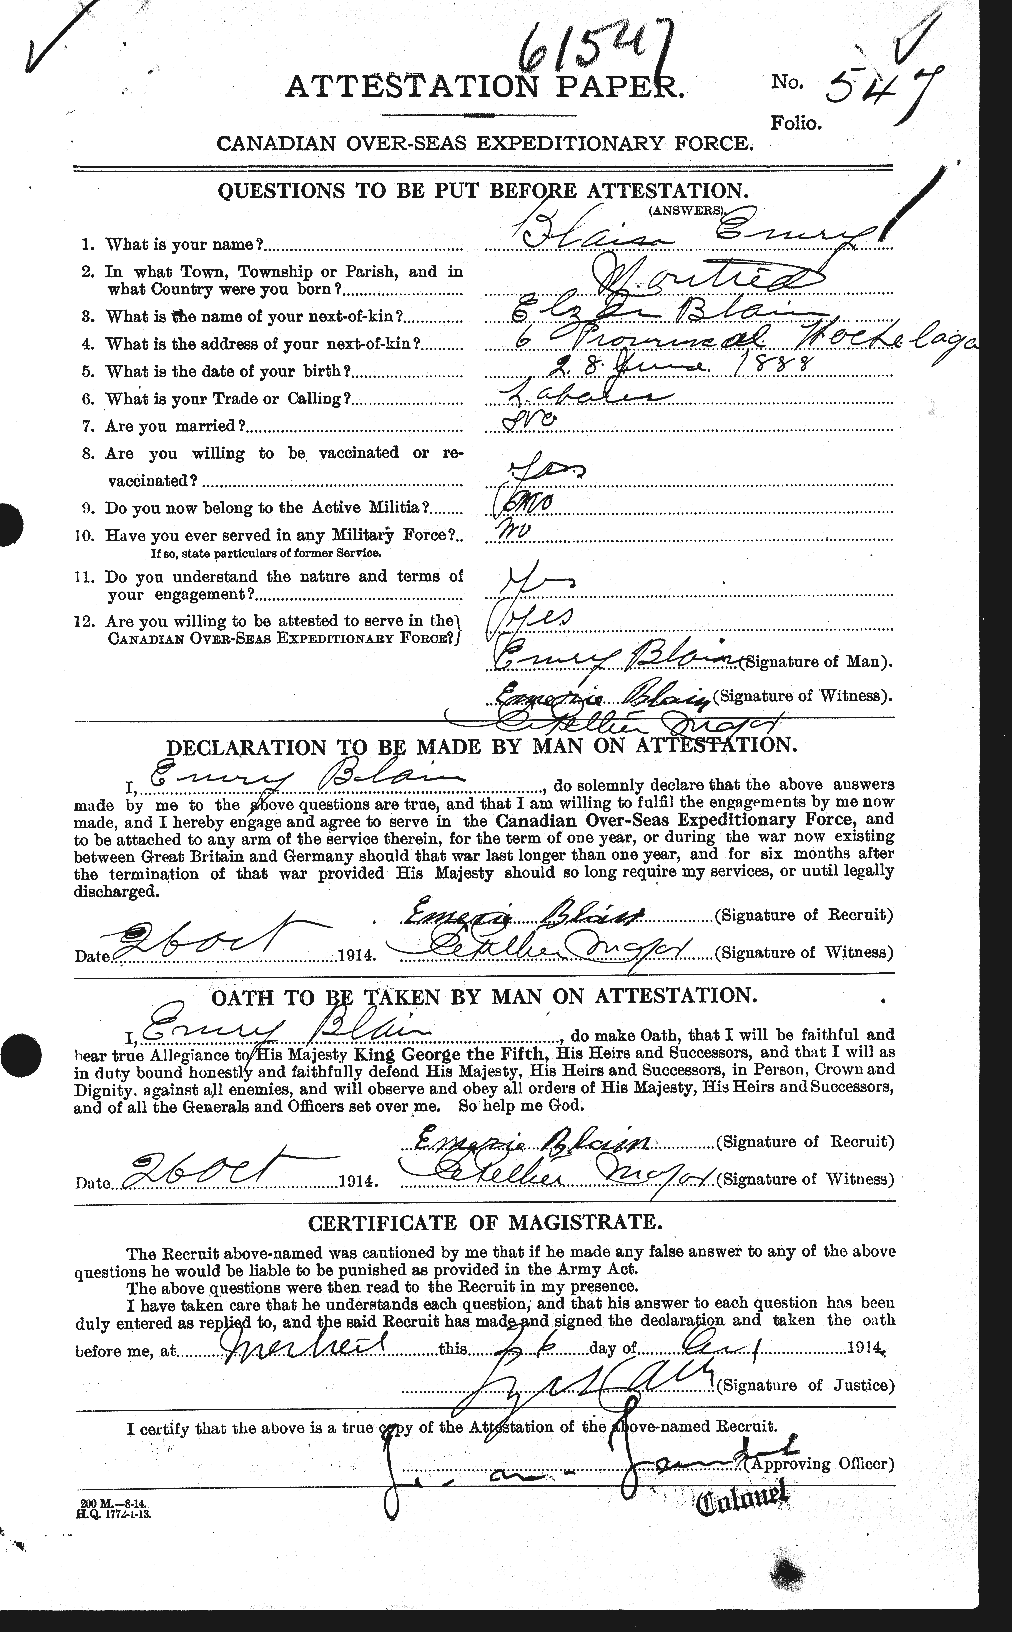 Personnel Records of the First World War - CEF 246001a